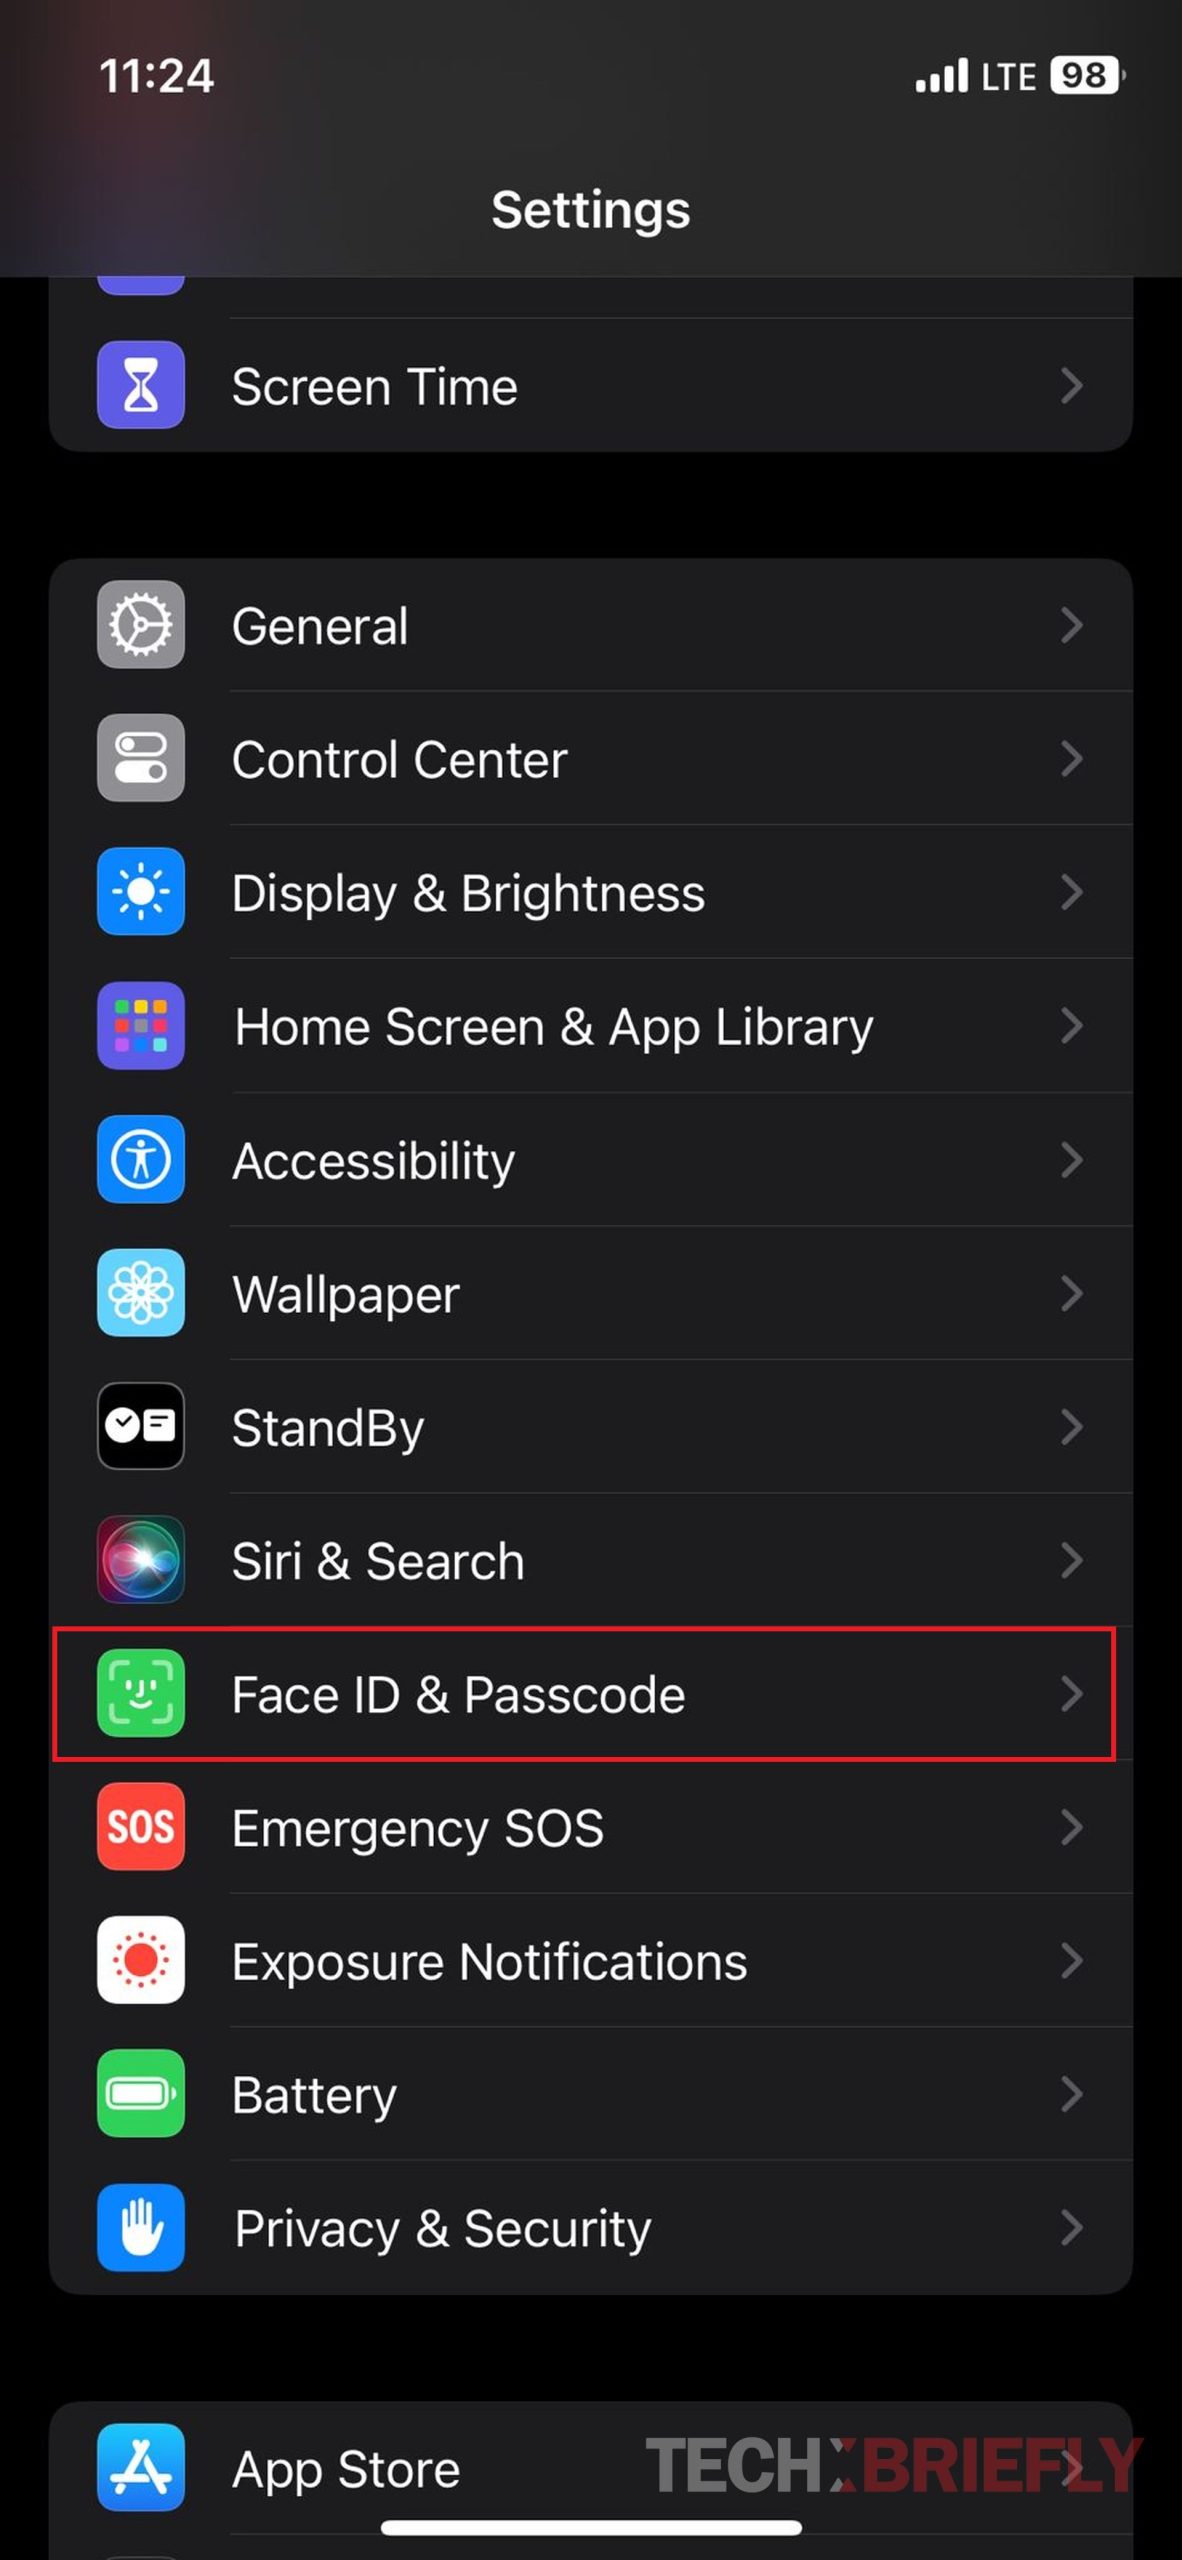 How to set iPhone Theft Protection settings?